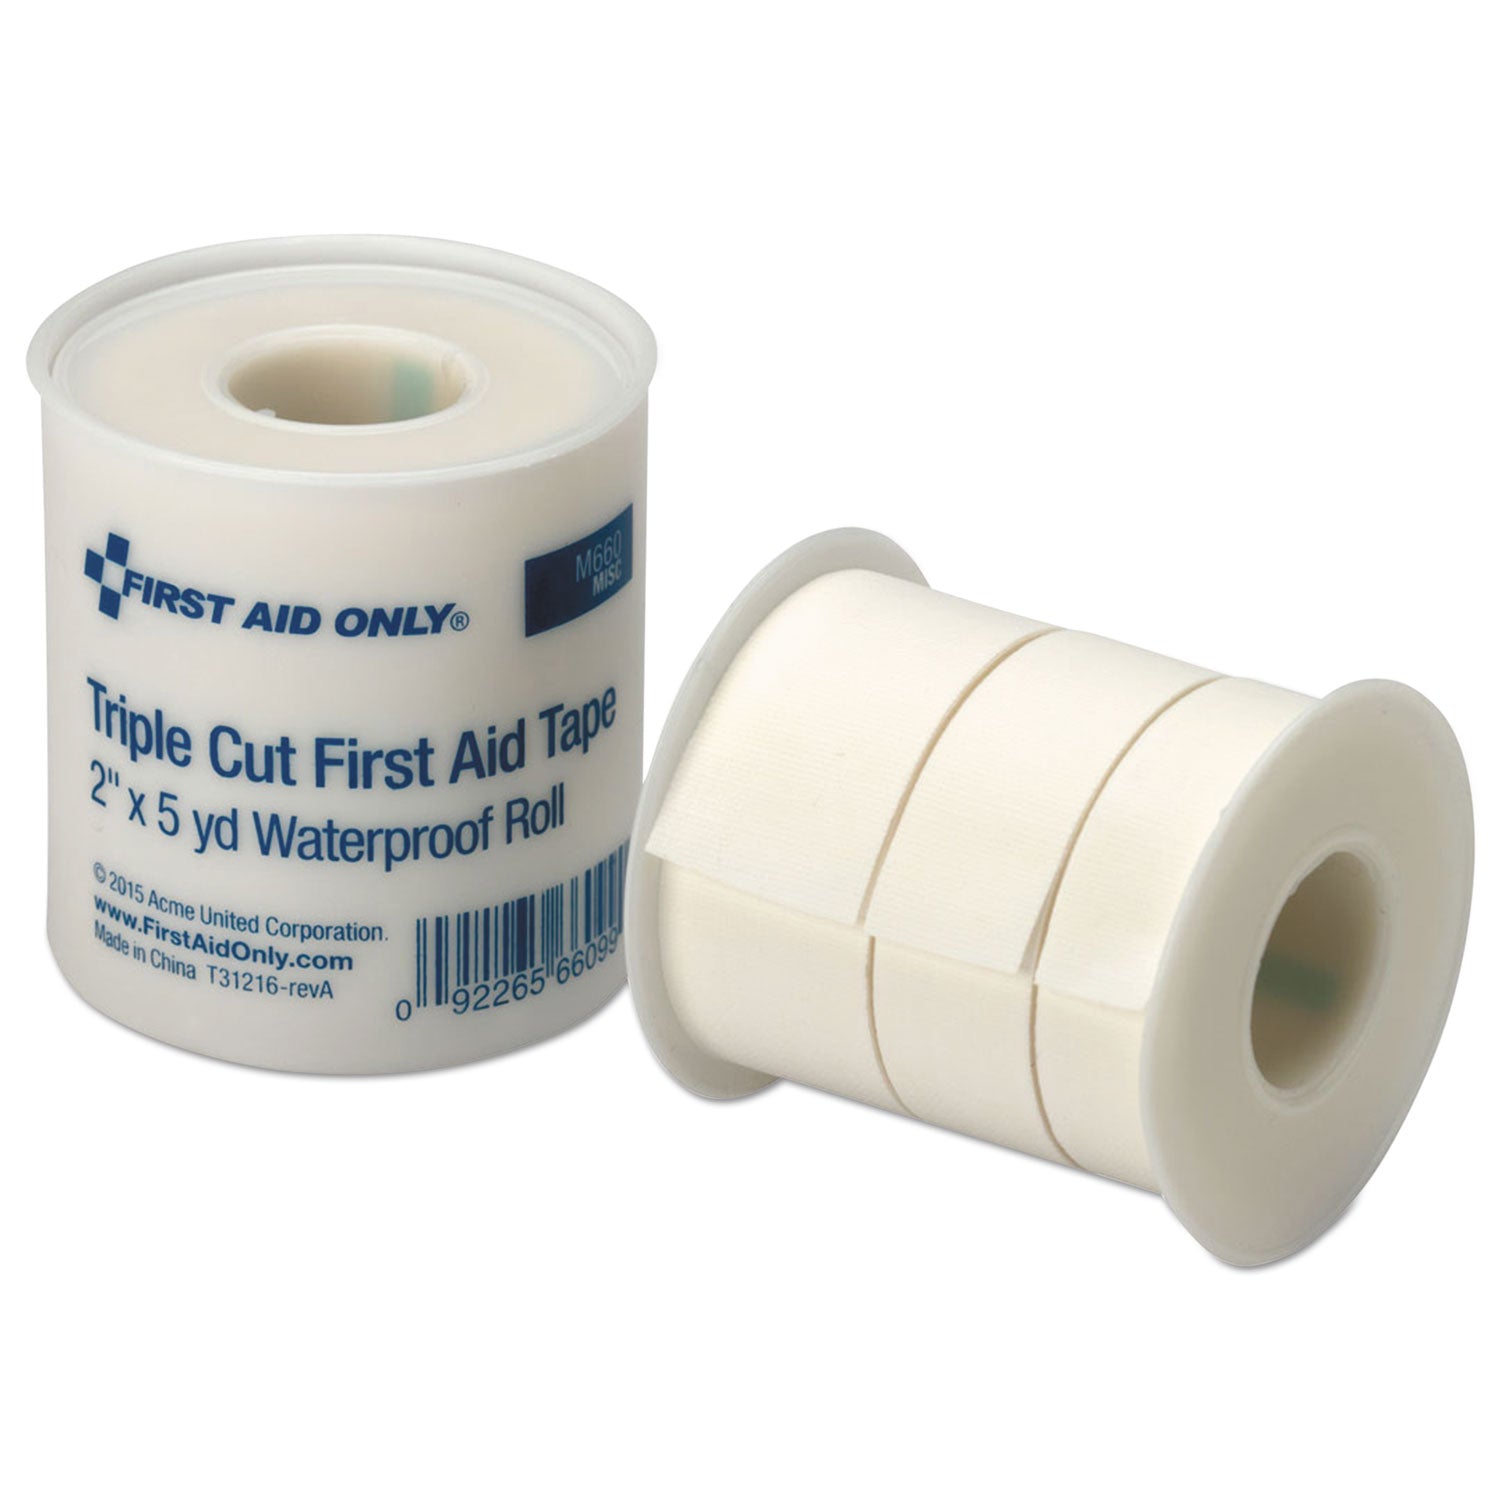 refill-for-smartcompliance-general-business-cabinet-triplecut-adhesive-tape-2-x-5-yd-roll_faofae9089 - 1